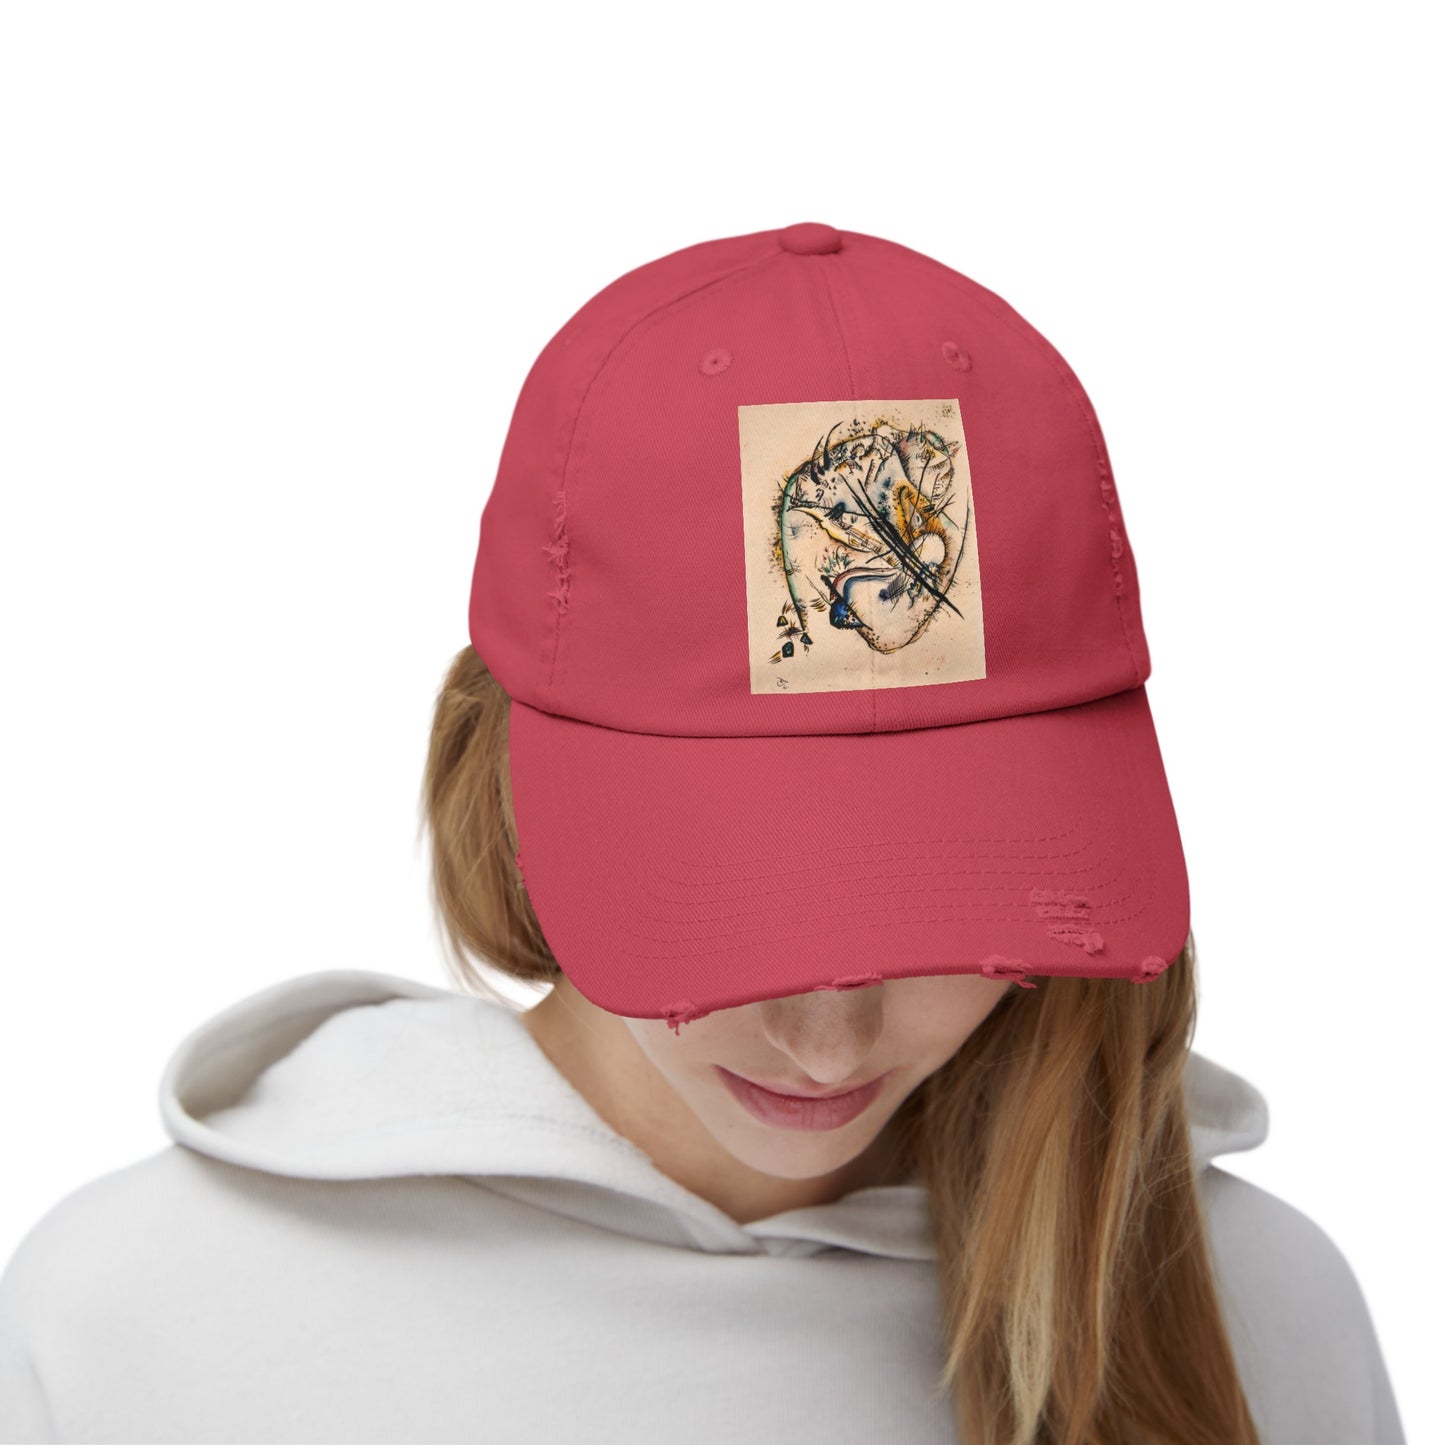 a woman wearing a red hat with a picture of a dragon on it